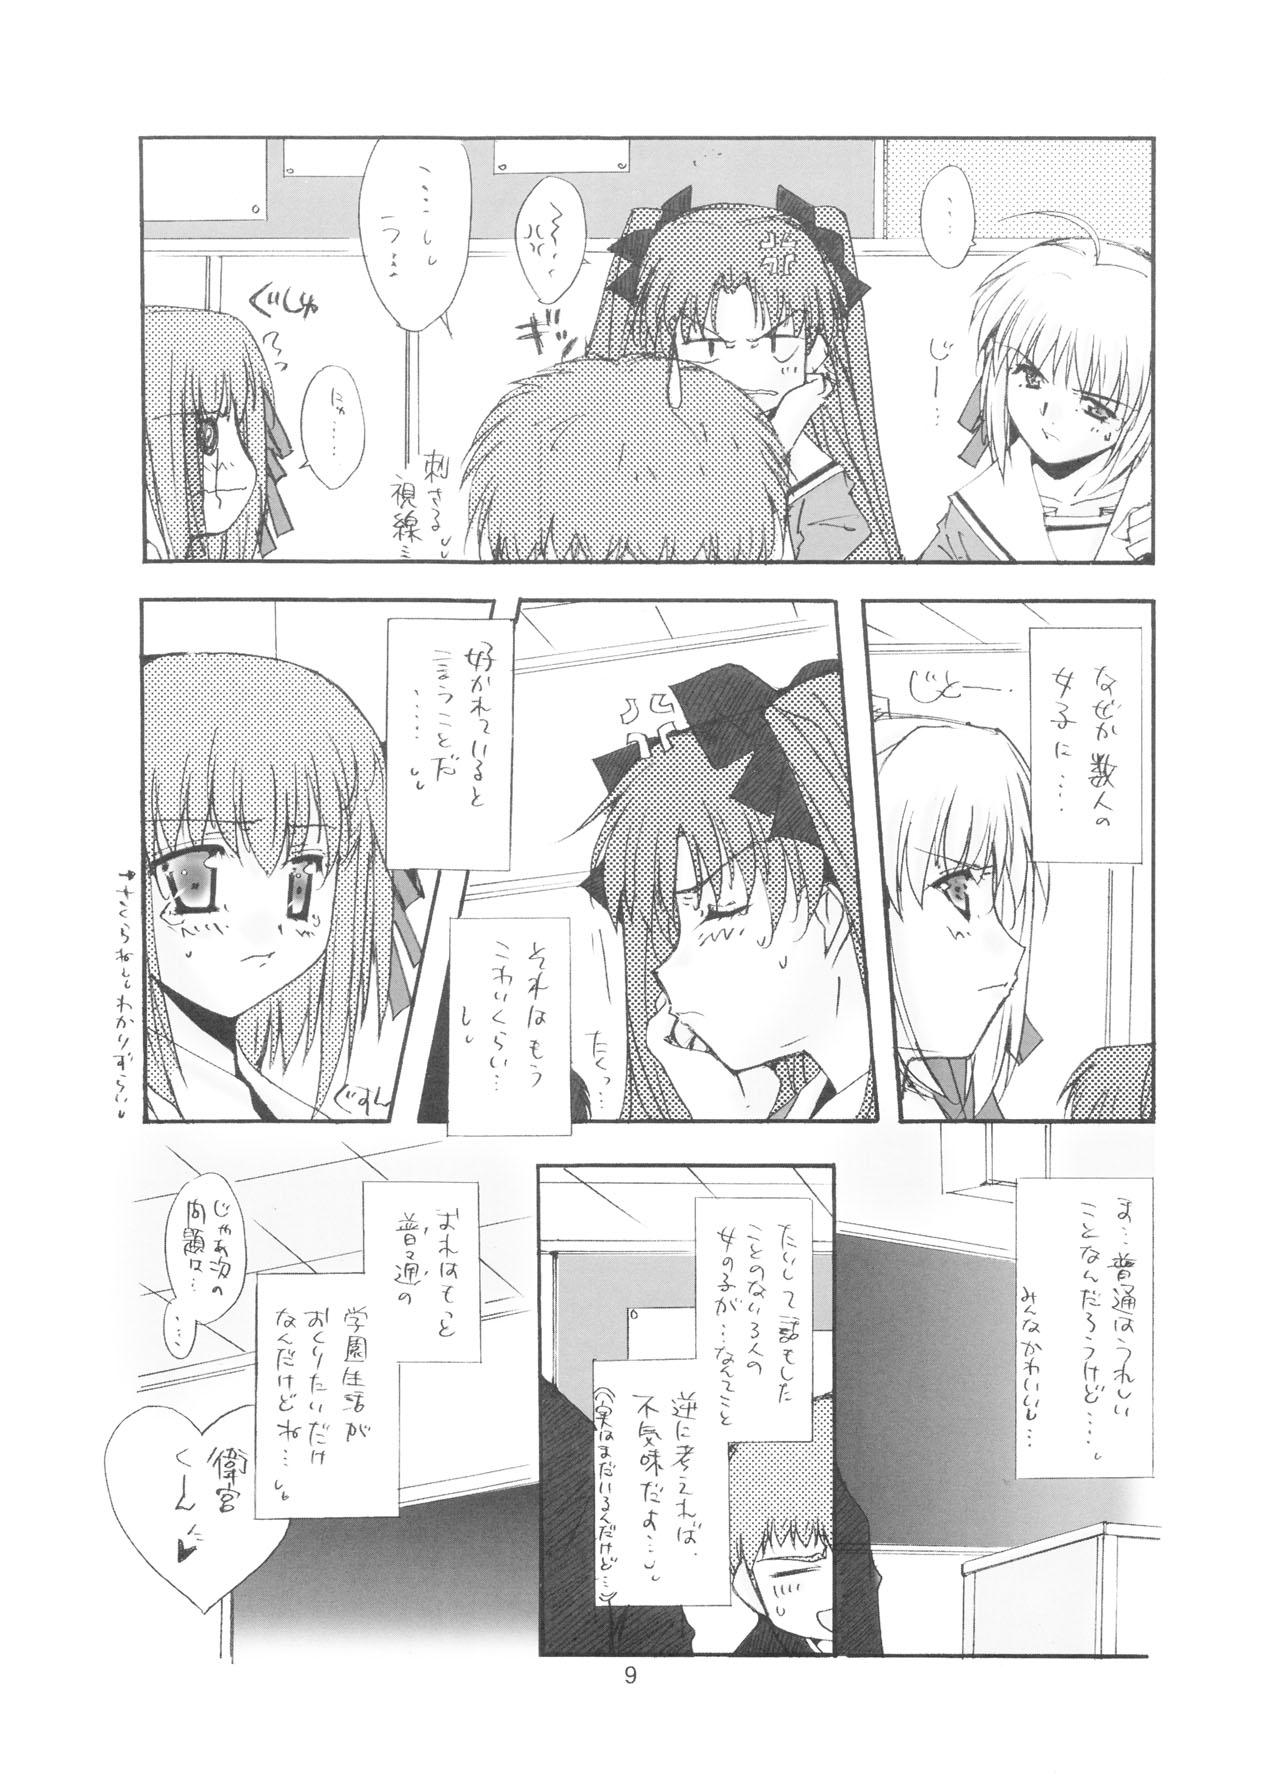 Huge Cock PURPLE DIGNITY - Fate stay night Moms - Page 6